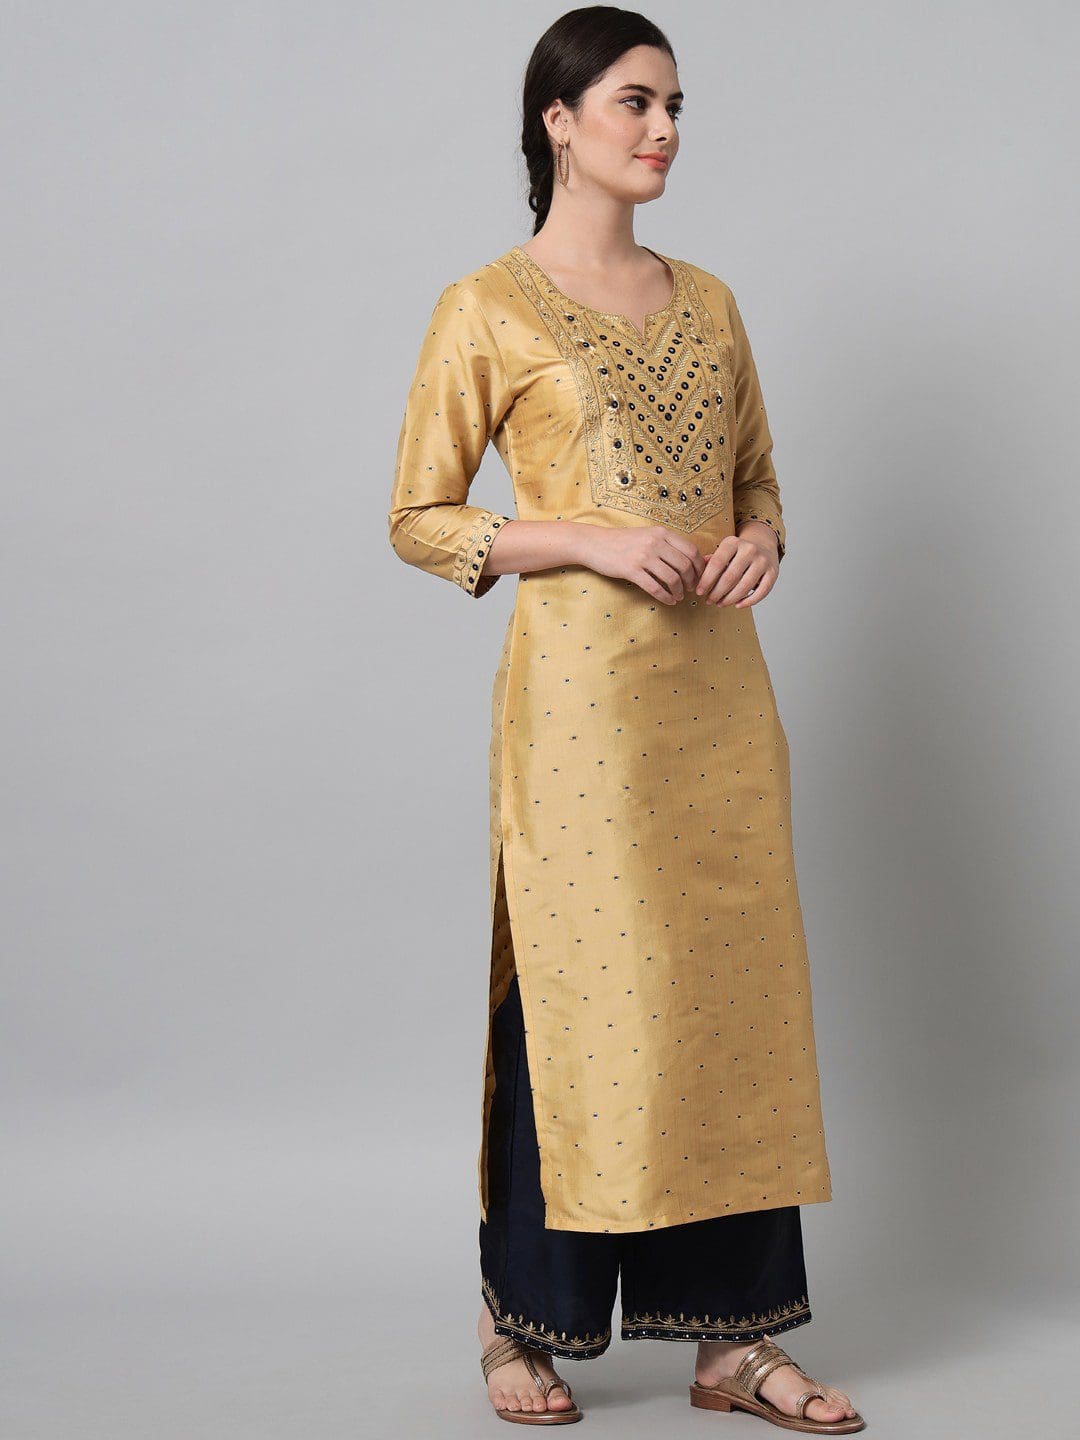 Embroidery Rayon Fabric Color Golden Beige Zari And Black Straight Kurti Trouser Set